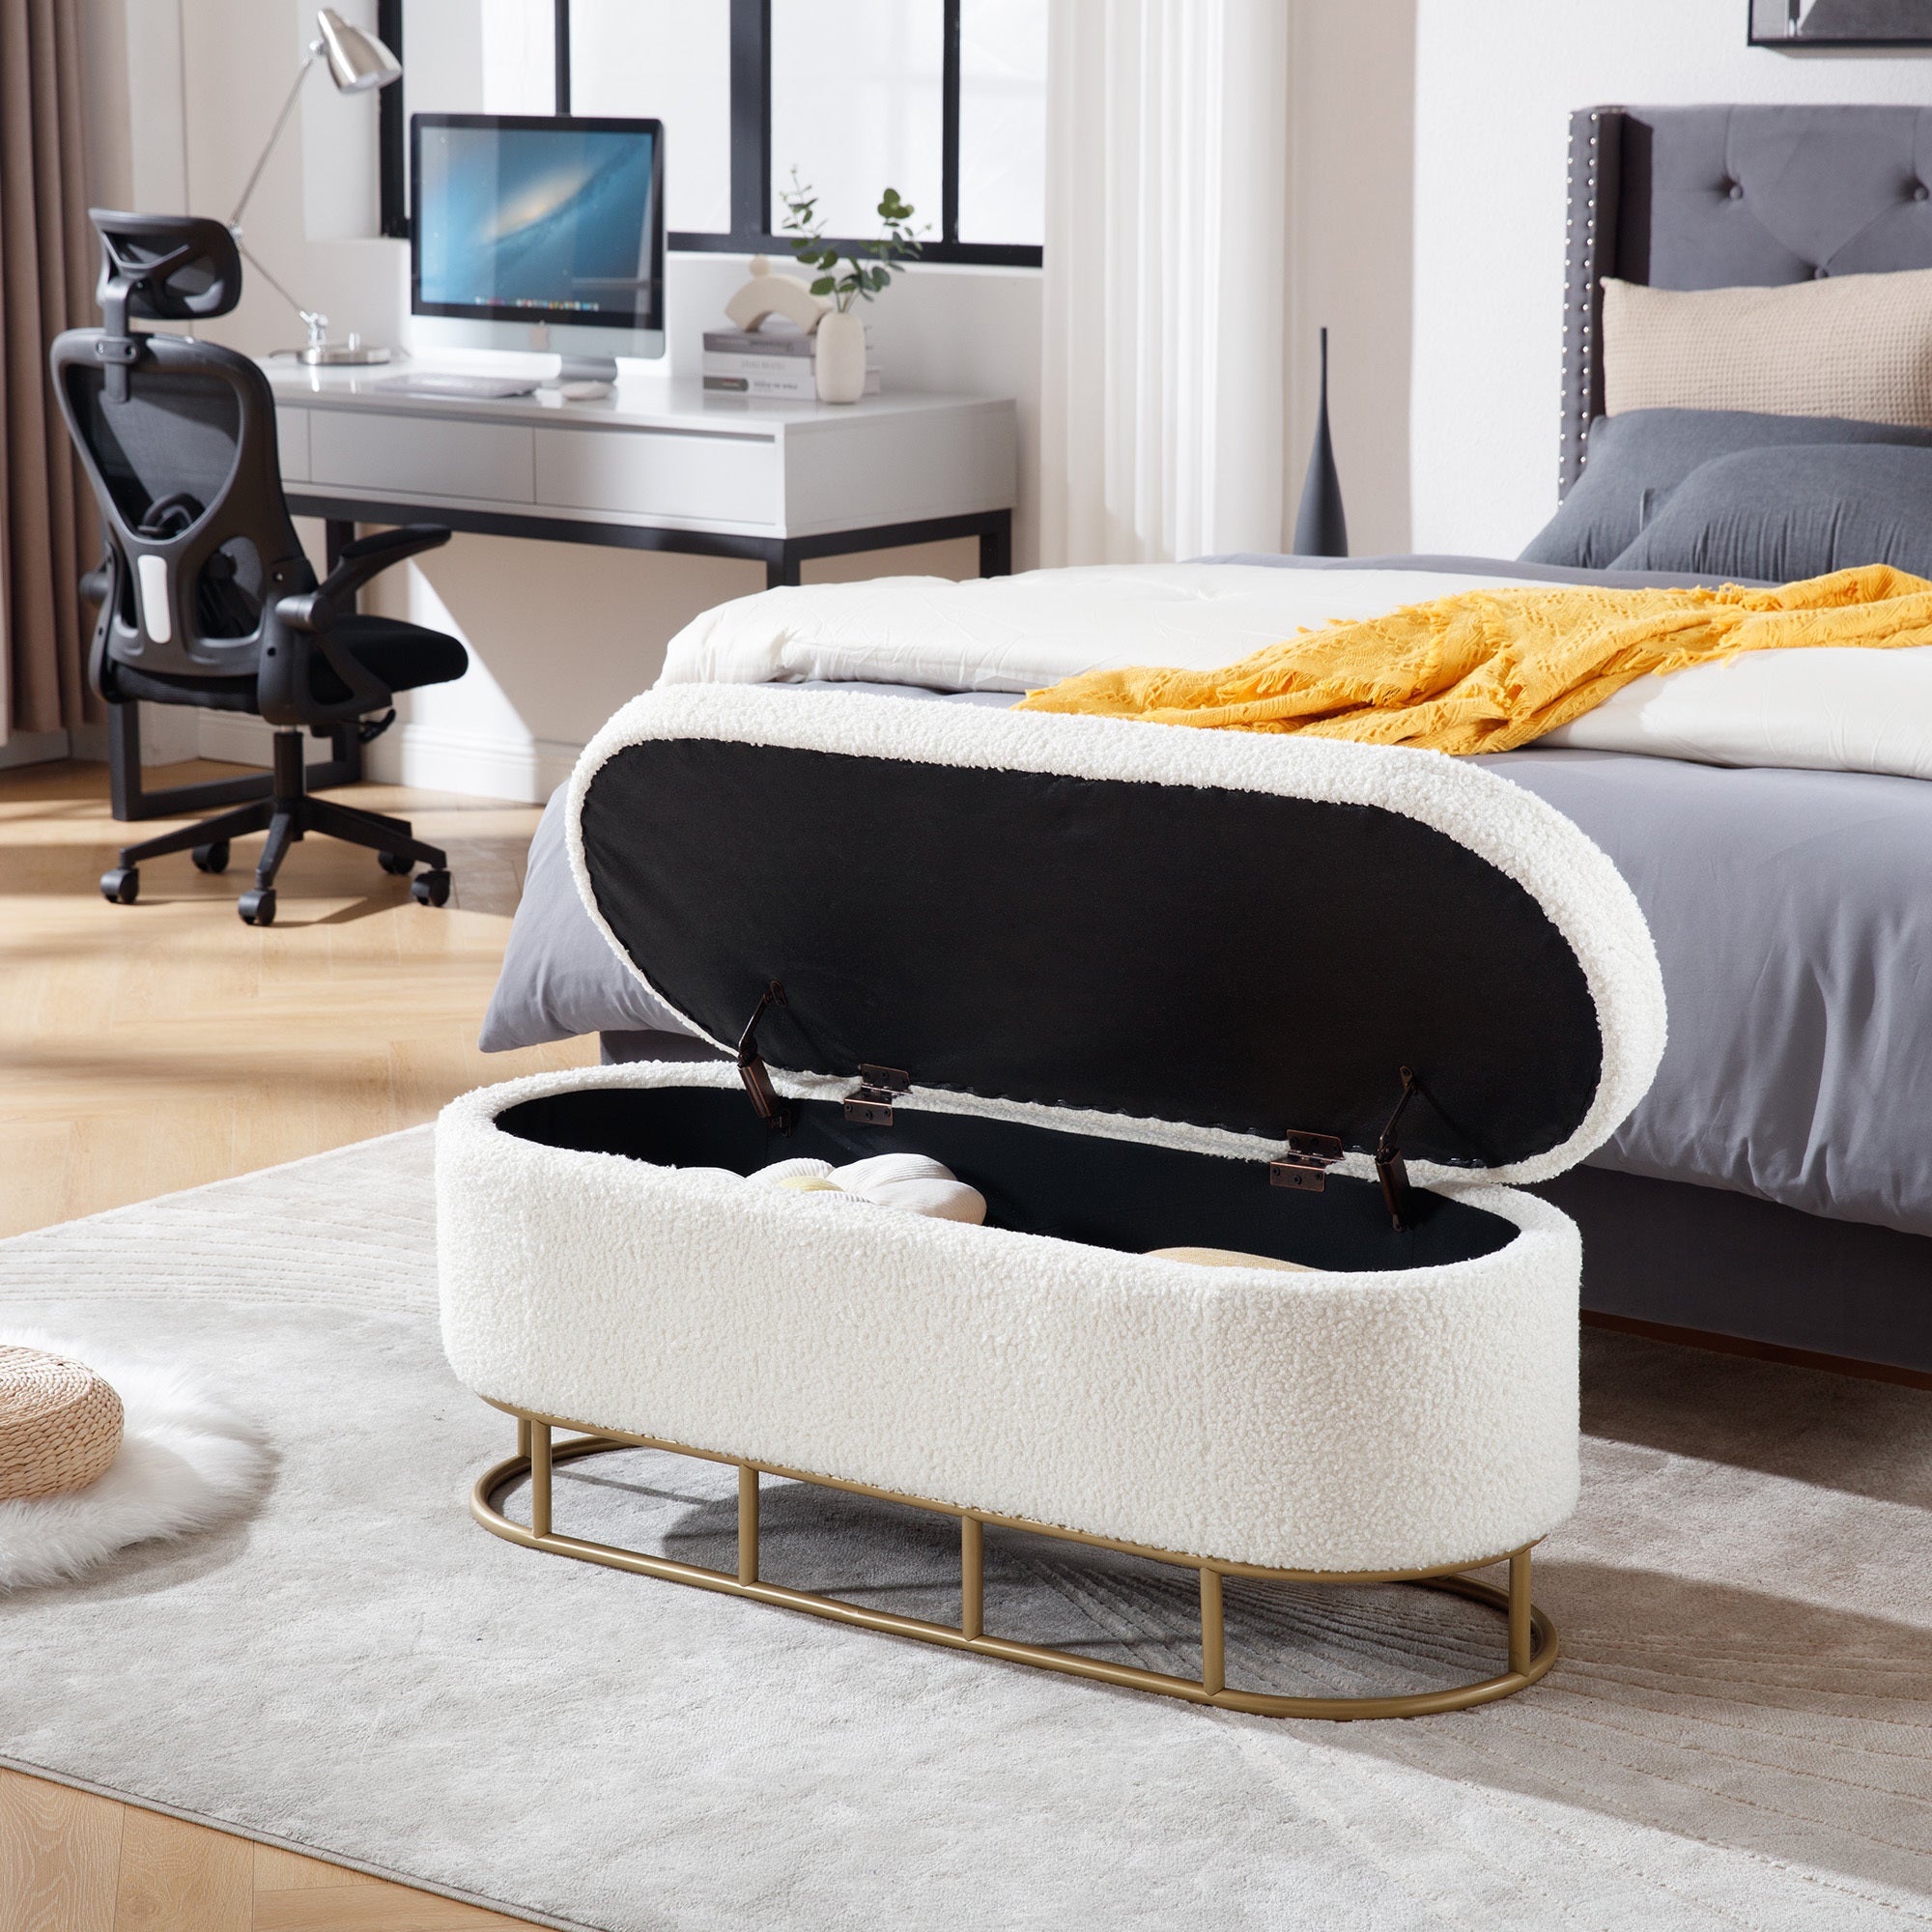 Oval Storage Bench for Living Room Bedroom End of cream-primary living space-modern-metal-internal